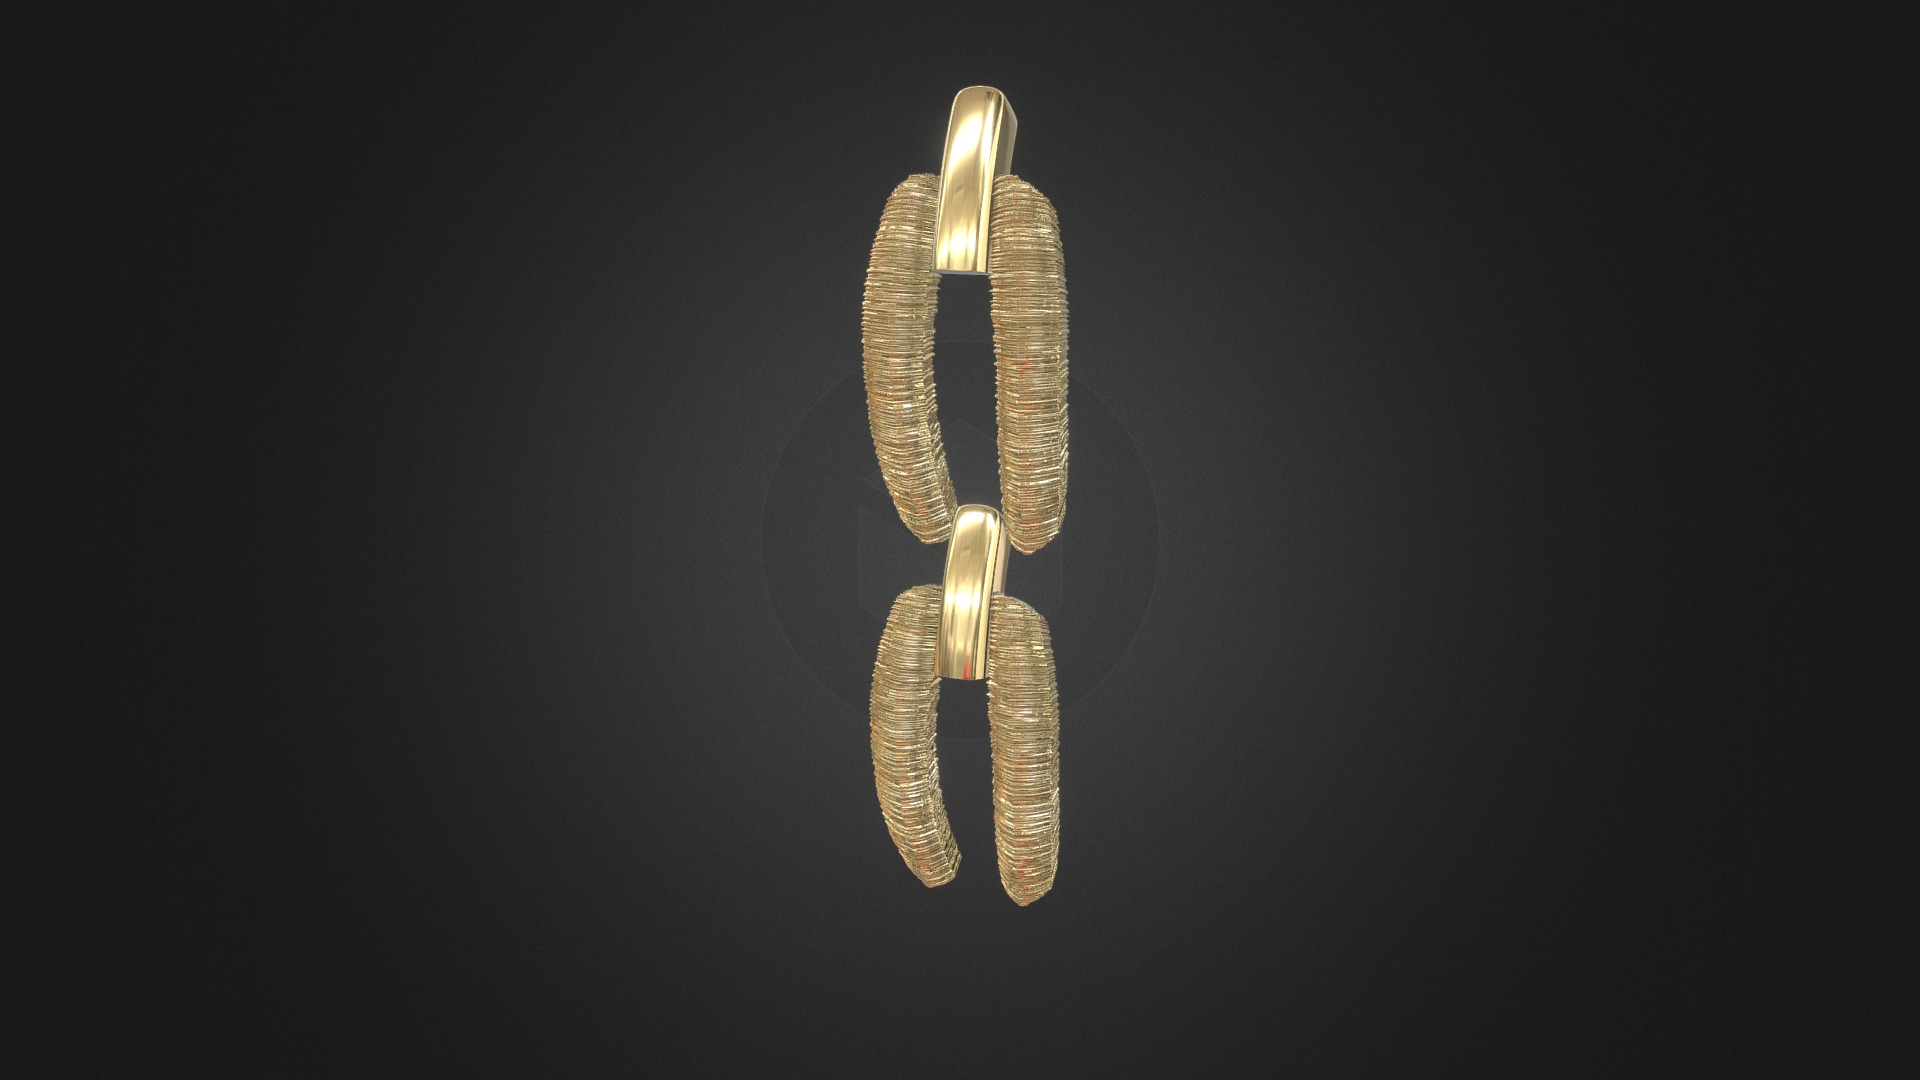 3D model 1092 – Bracelet - This is a 3D model of the 1092 - Bracelet. The 3D model is about a close-up of a knife.